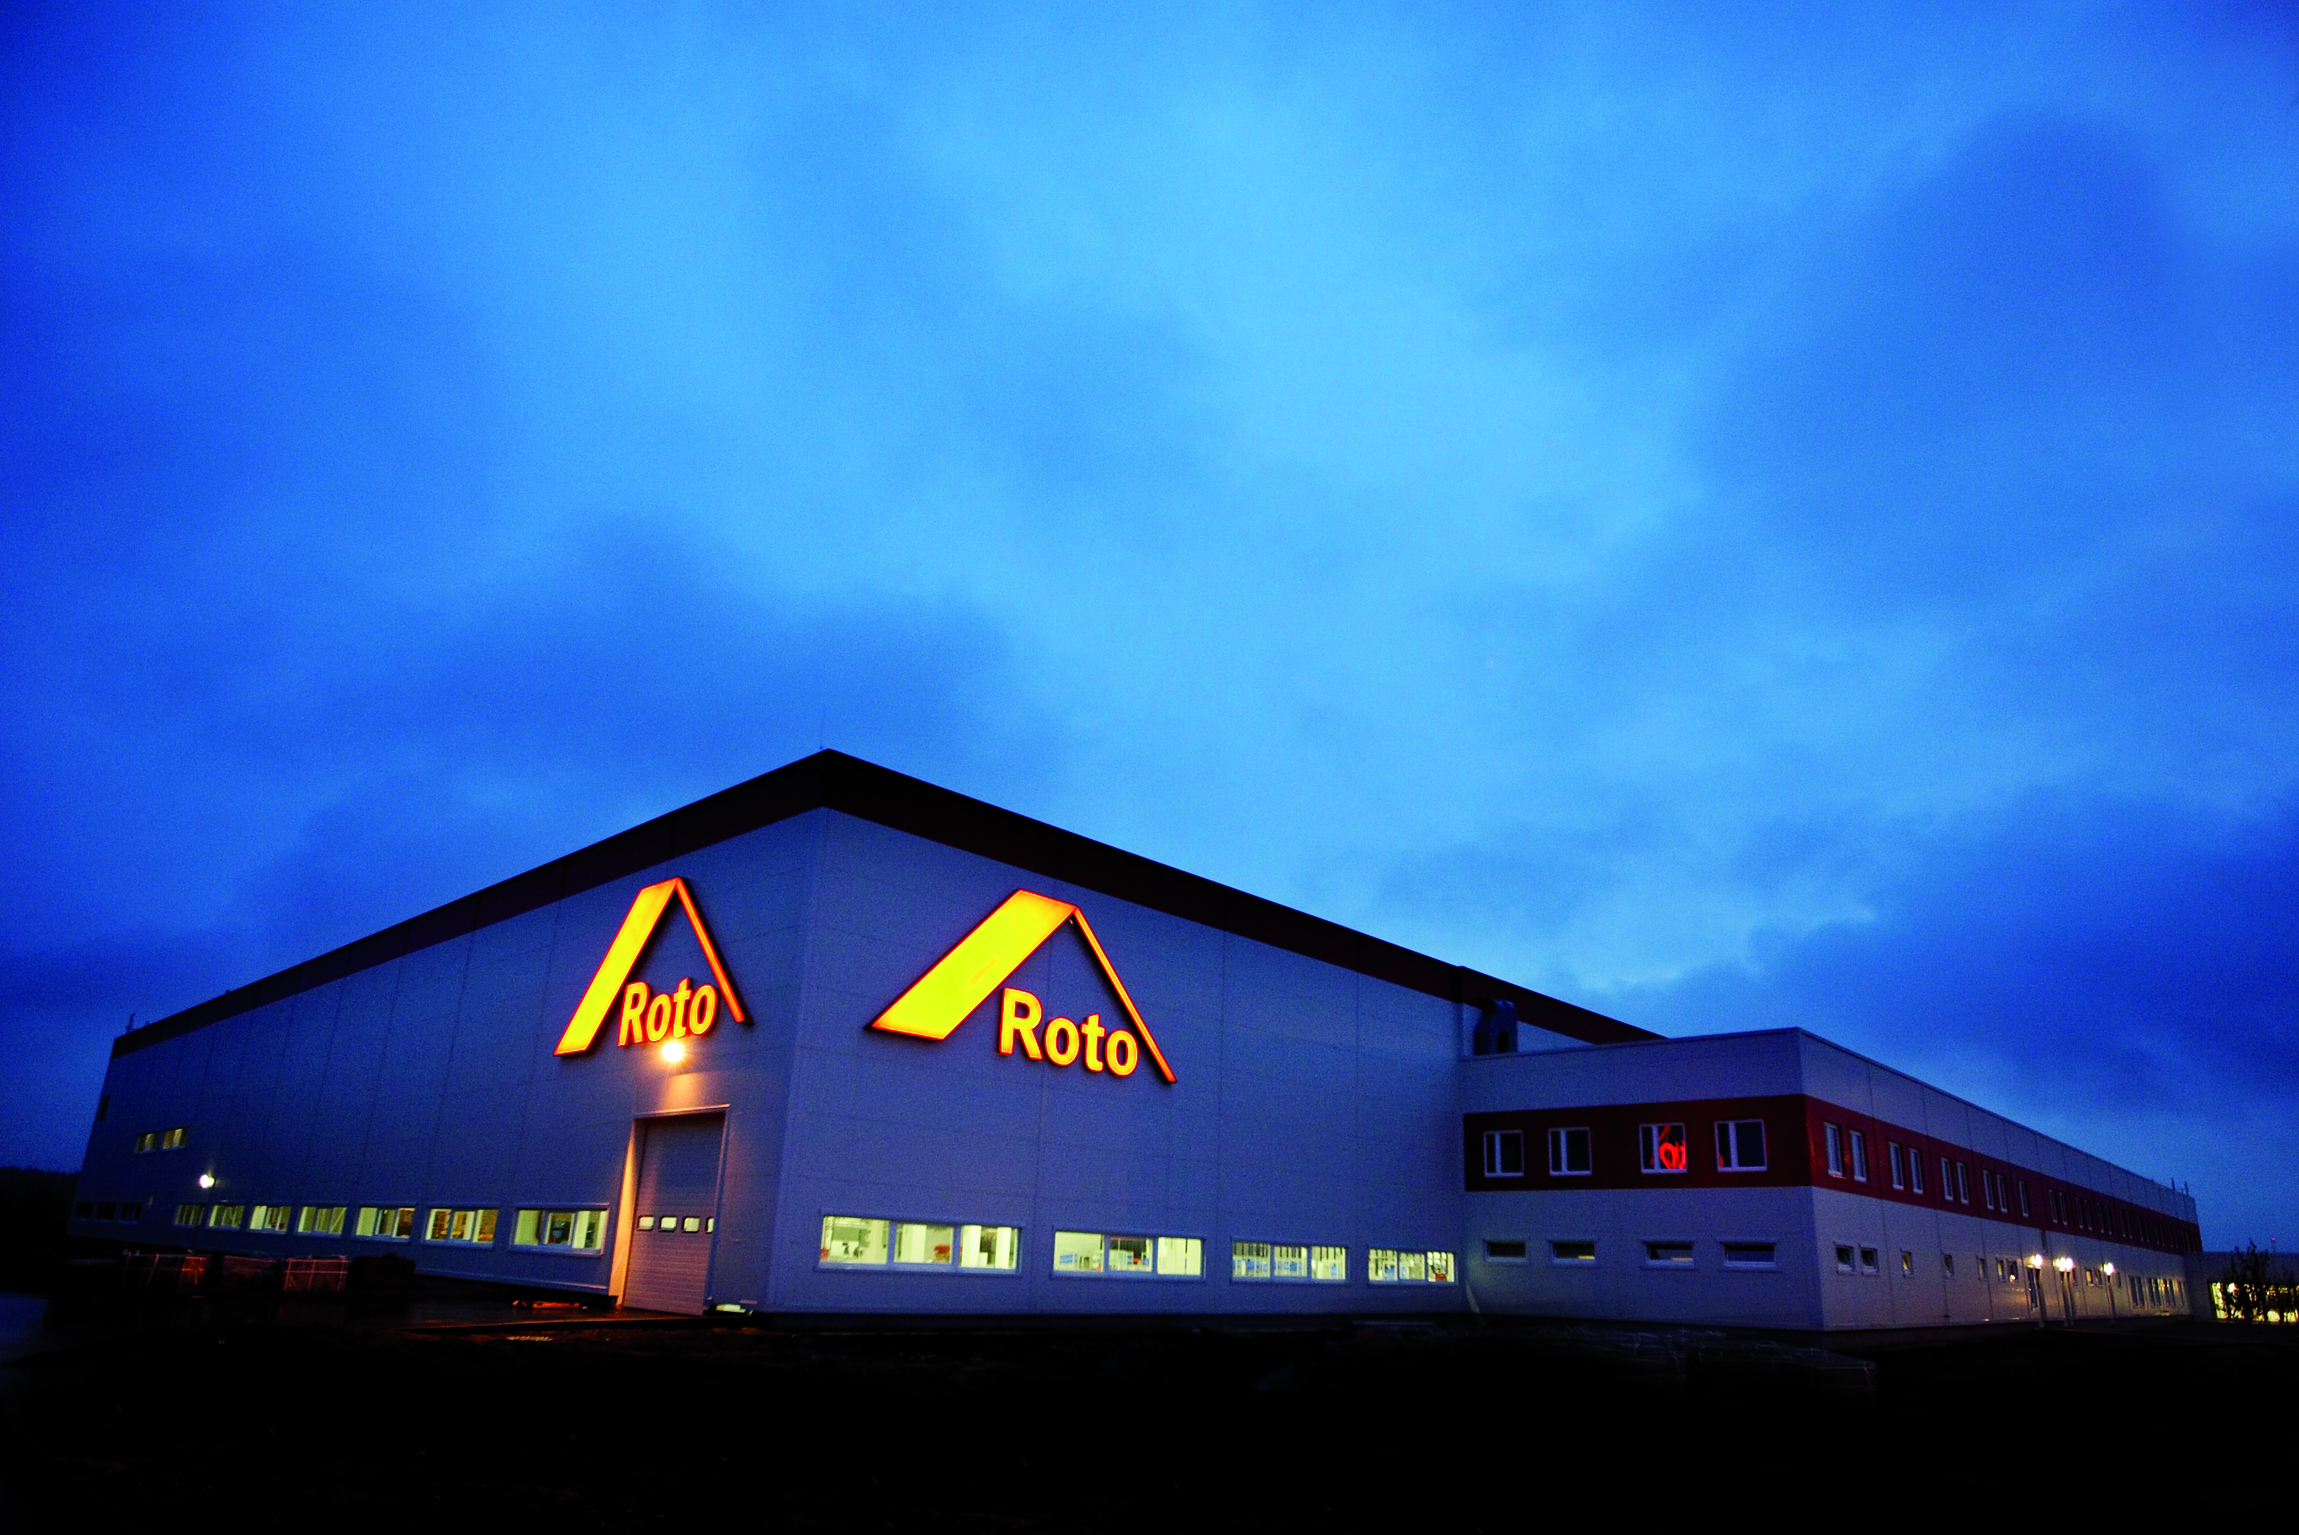 Roto - the German-based aluminum windows and doors manufacturer